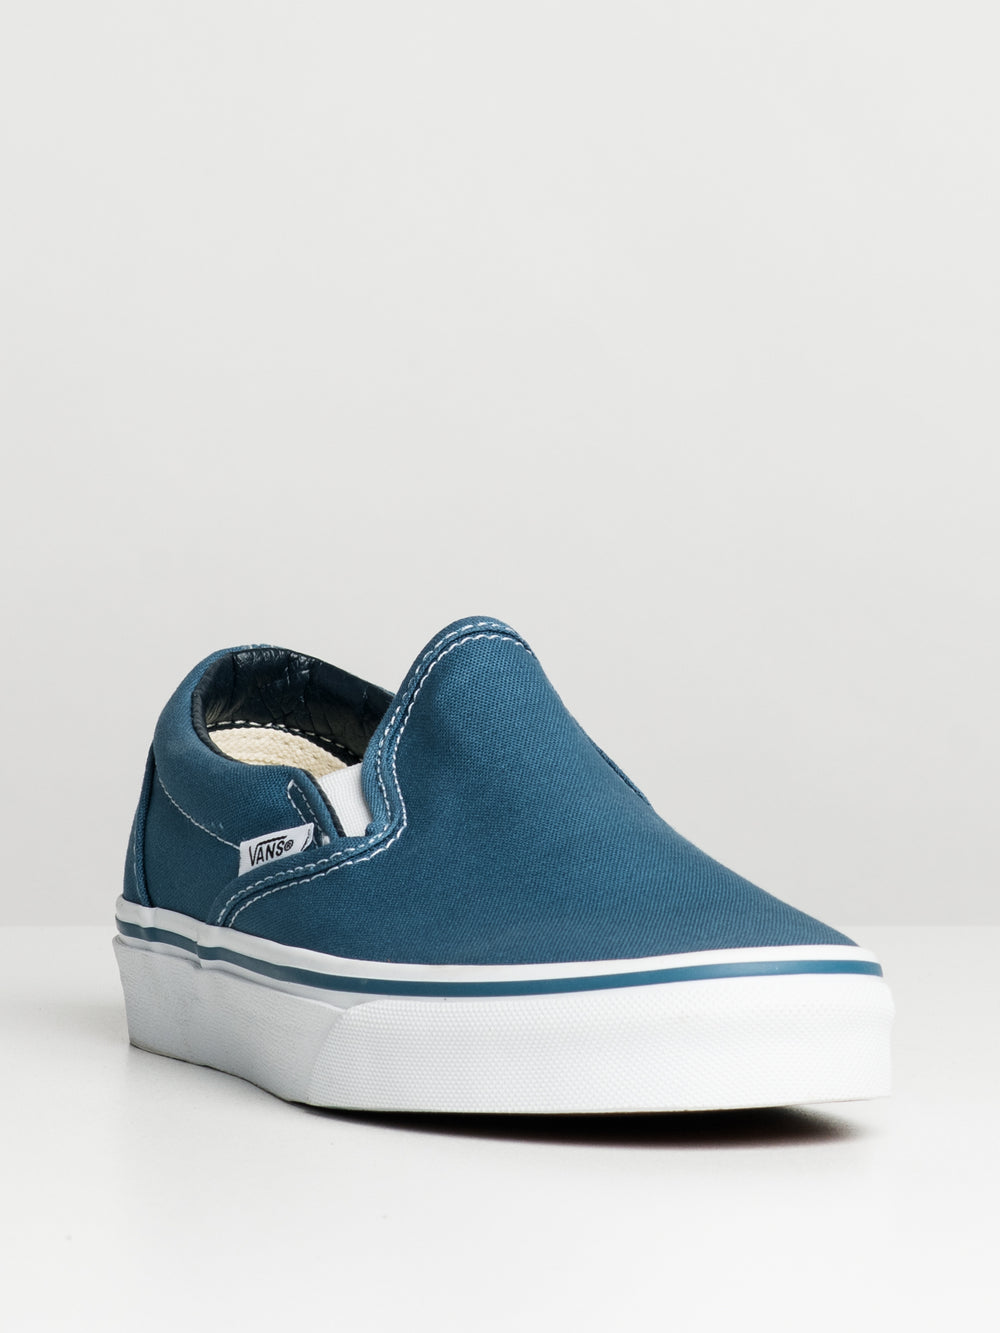 WOMENS VANS CLASSIC SLIP-ON NAVY CANVAS SHOES - CLEARANCE